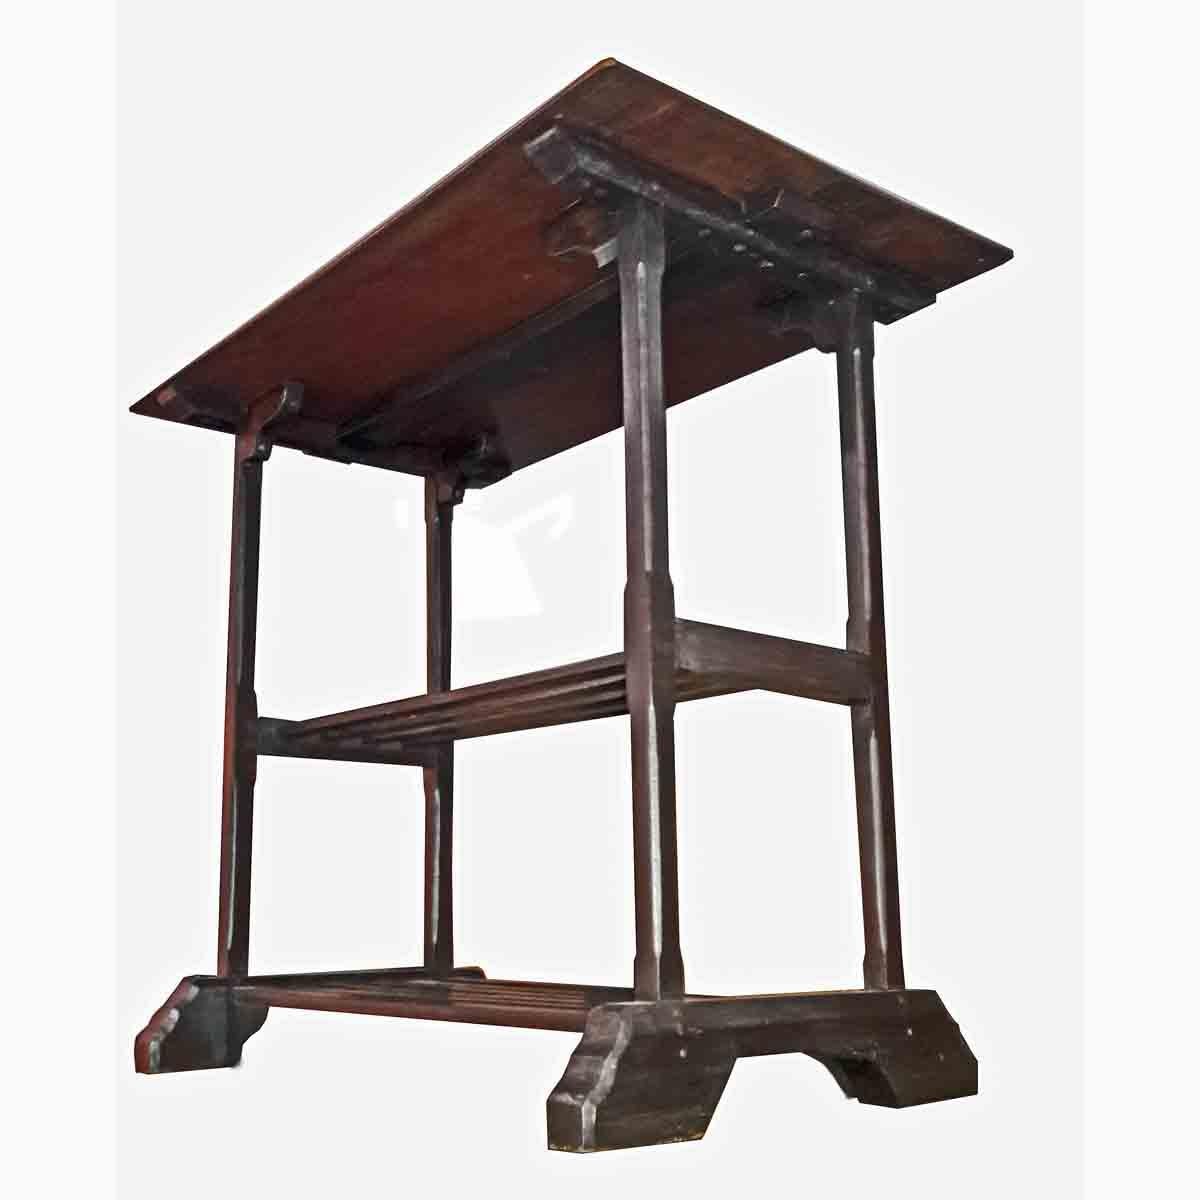 Other Two-Shelf Wood Utility Table from Thailand